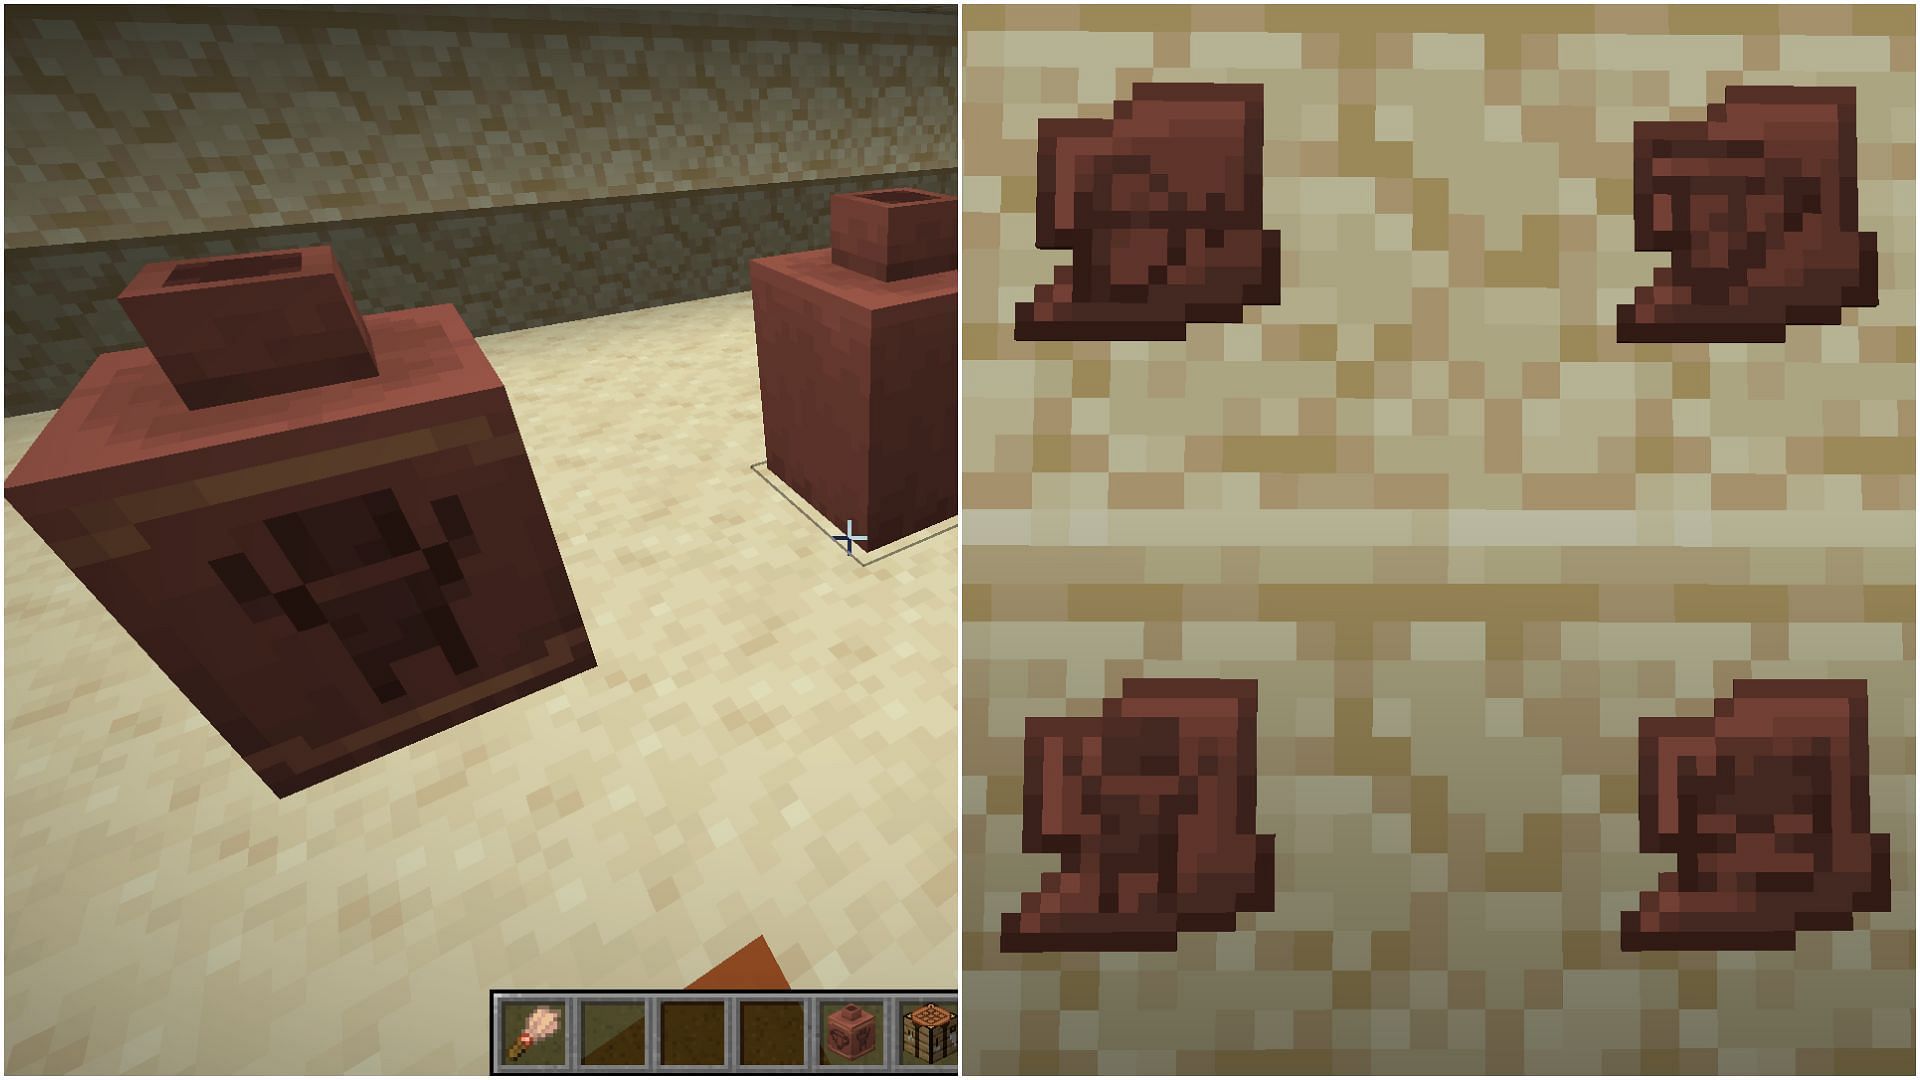 The Archeology feature is finally coming with Minecraft 1.20 update (Image via Mojang)